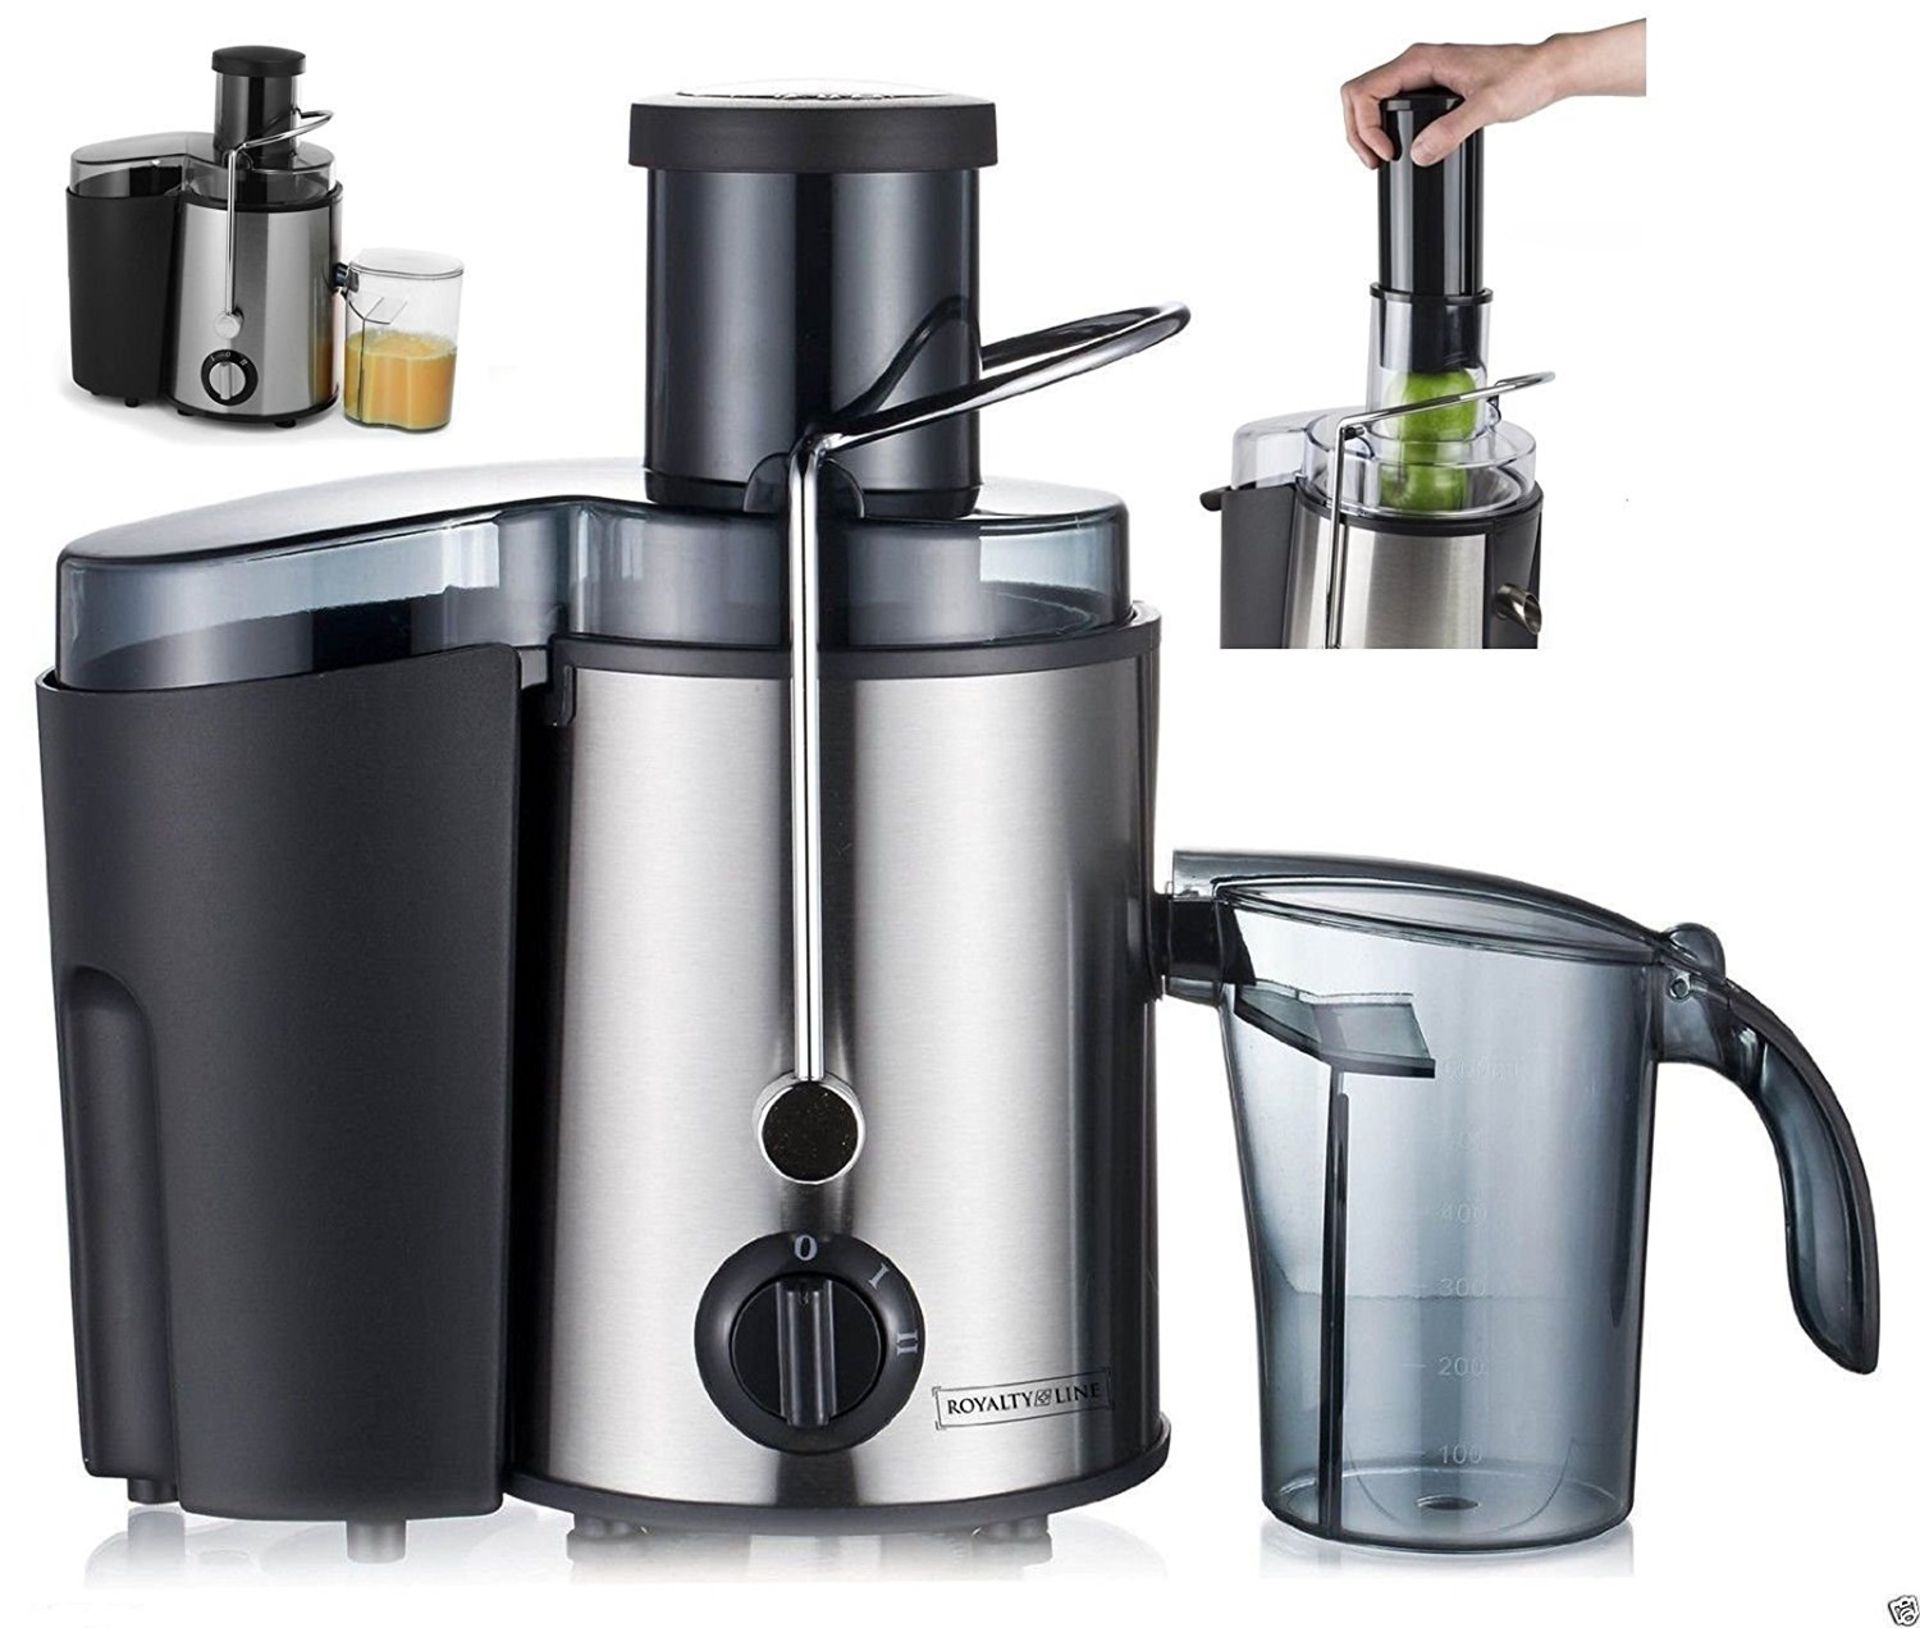 V Brand New Royalty Line 1000W Juice Extractor - Extra Large Filler Spout - Flexible anti-drip Juice